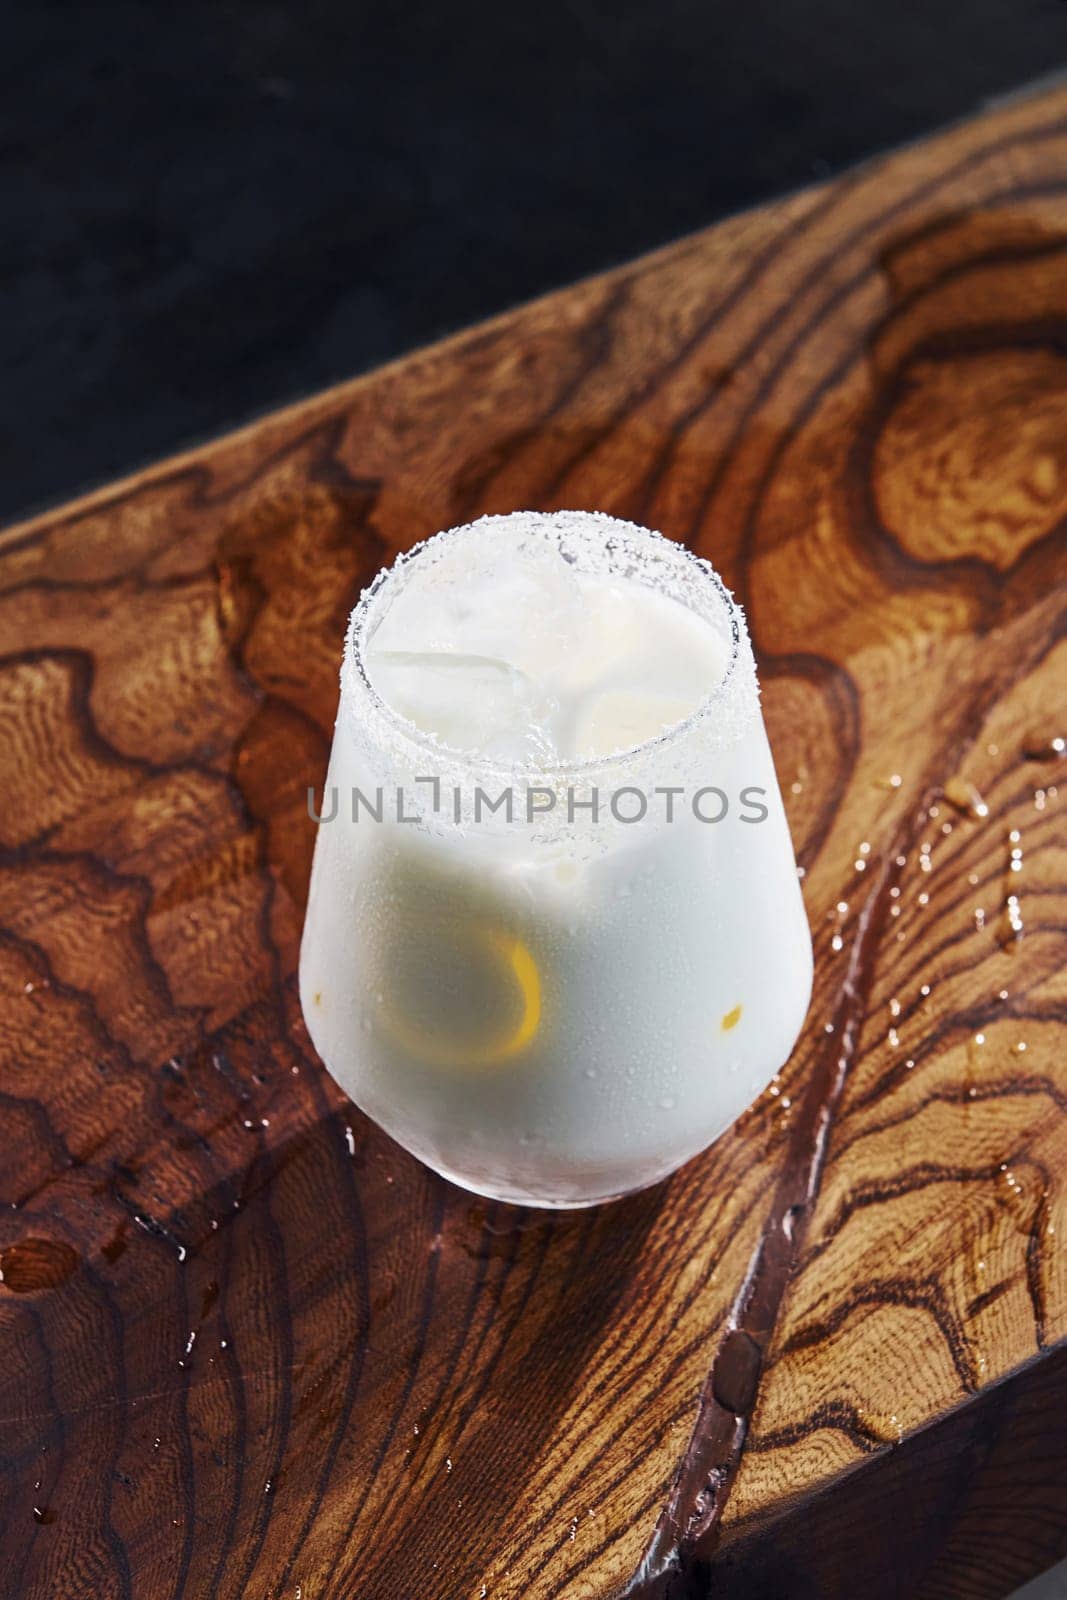 Slice of lemon inside. Close up view of fresh summer cocktail on the wooden table.